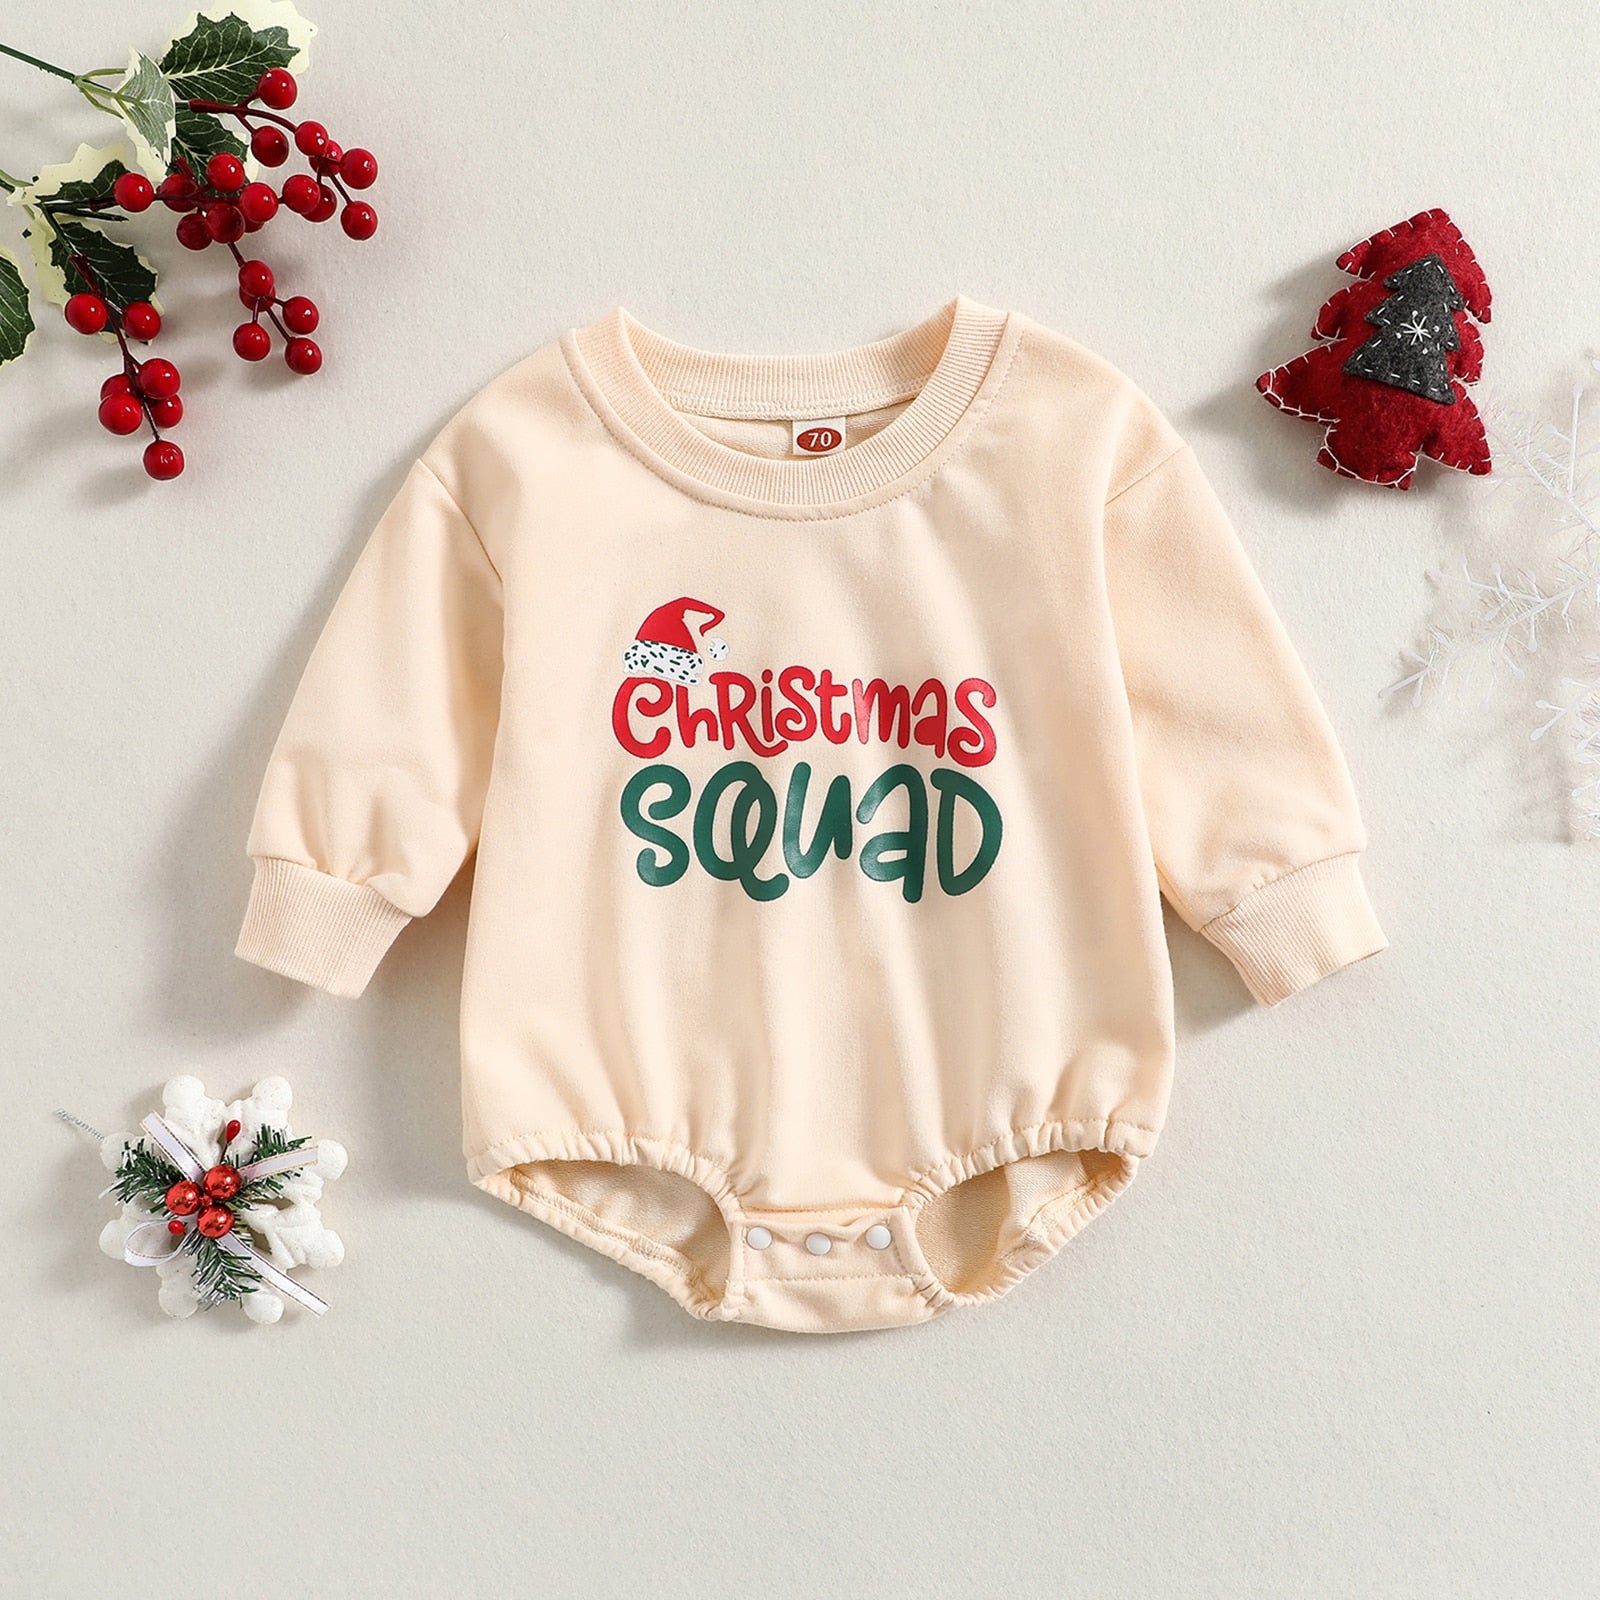 Fashion Baby Boys Girls Christmas Sweatshirts Rompers 2 Colors Santa Claus Letter Print Long Sleeve Pullover Jumsuits 0-24M Rswank